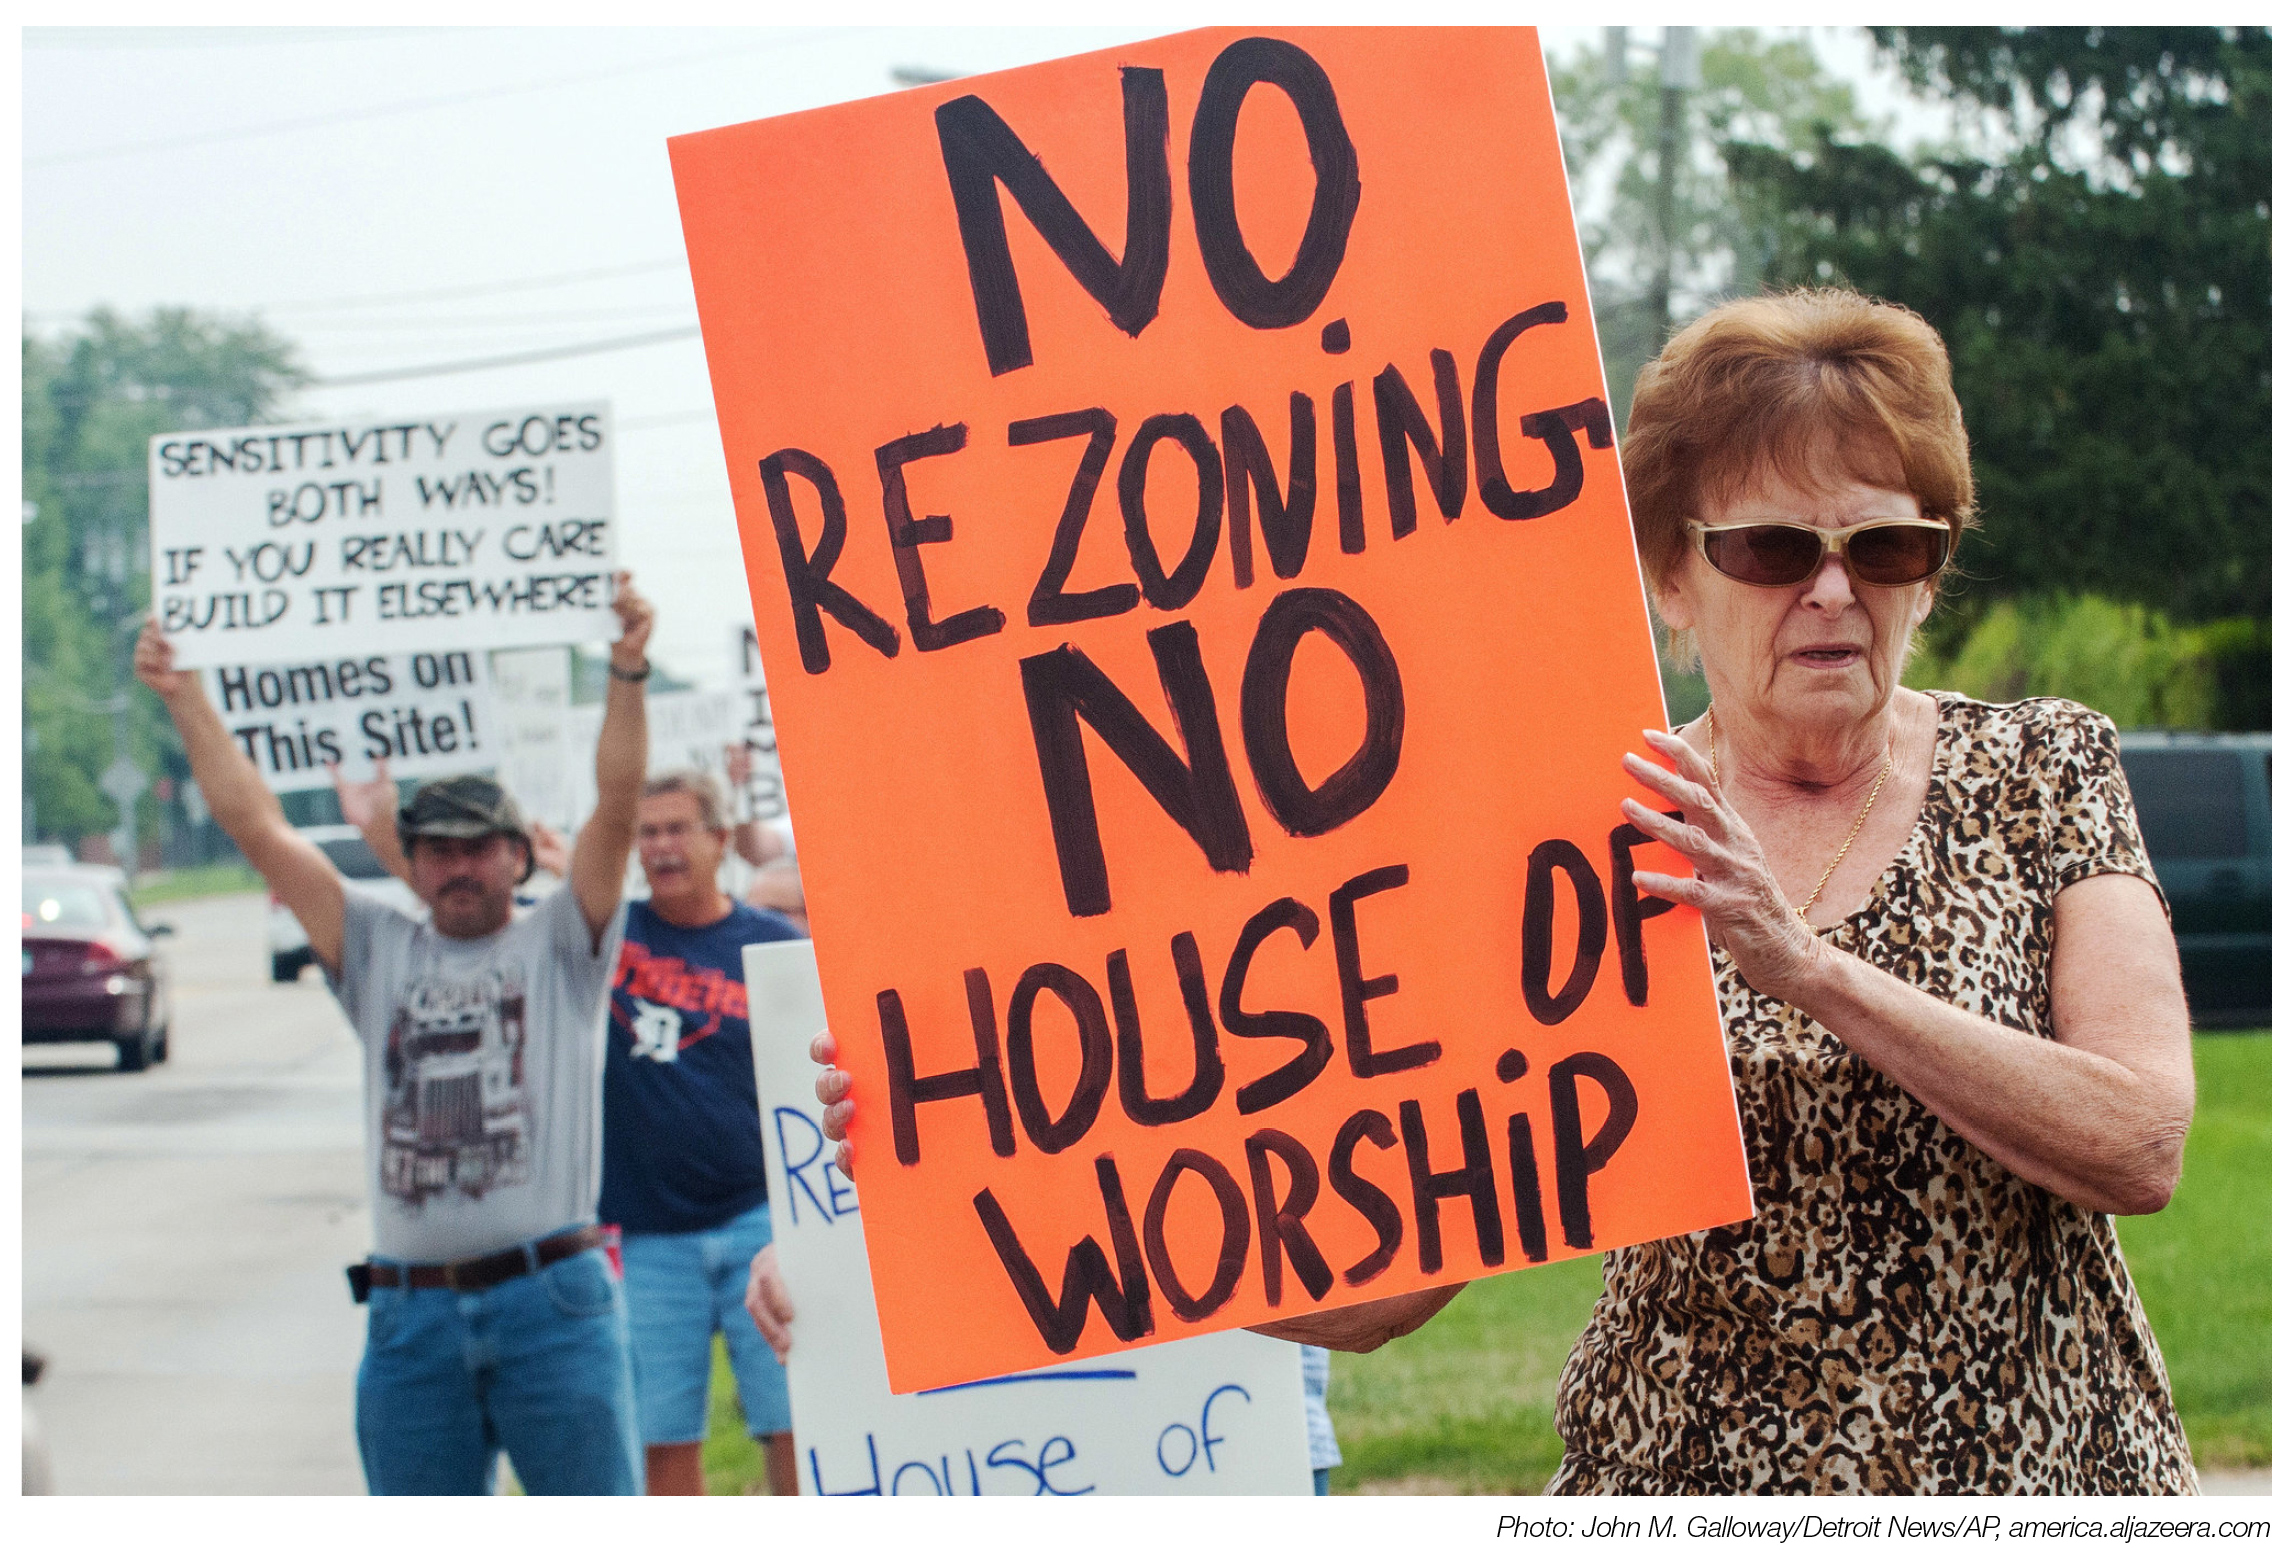 A woman holds an orange sign reading "no rezoning, no house of worship" with several people behind her, also holding signs.